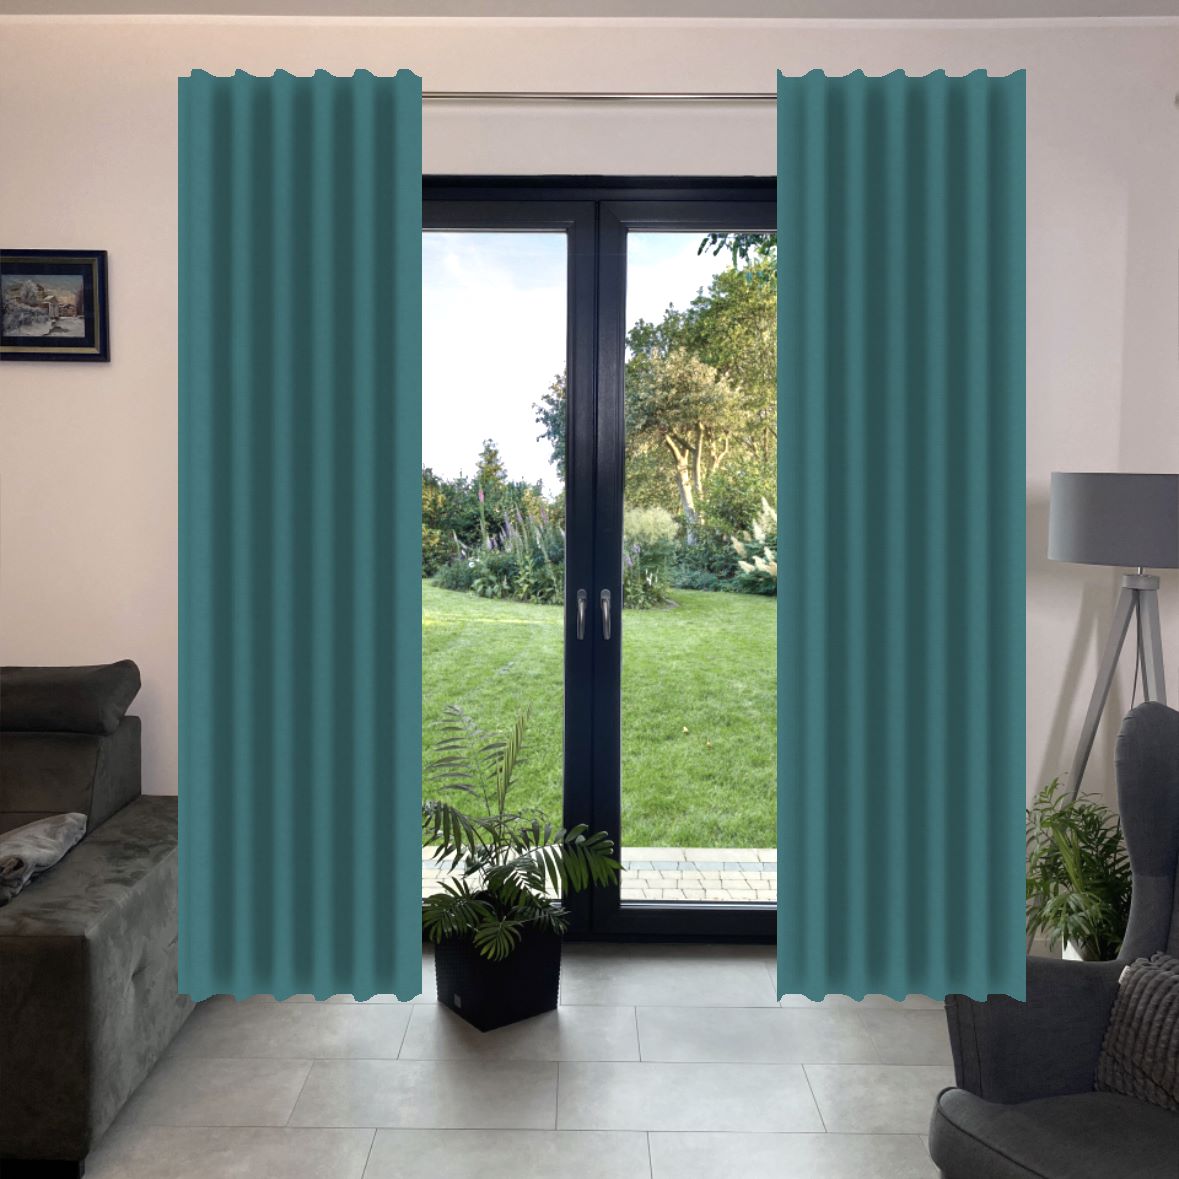 visualisation of a drape against a photo of the window